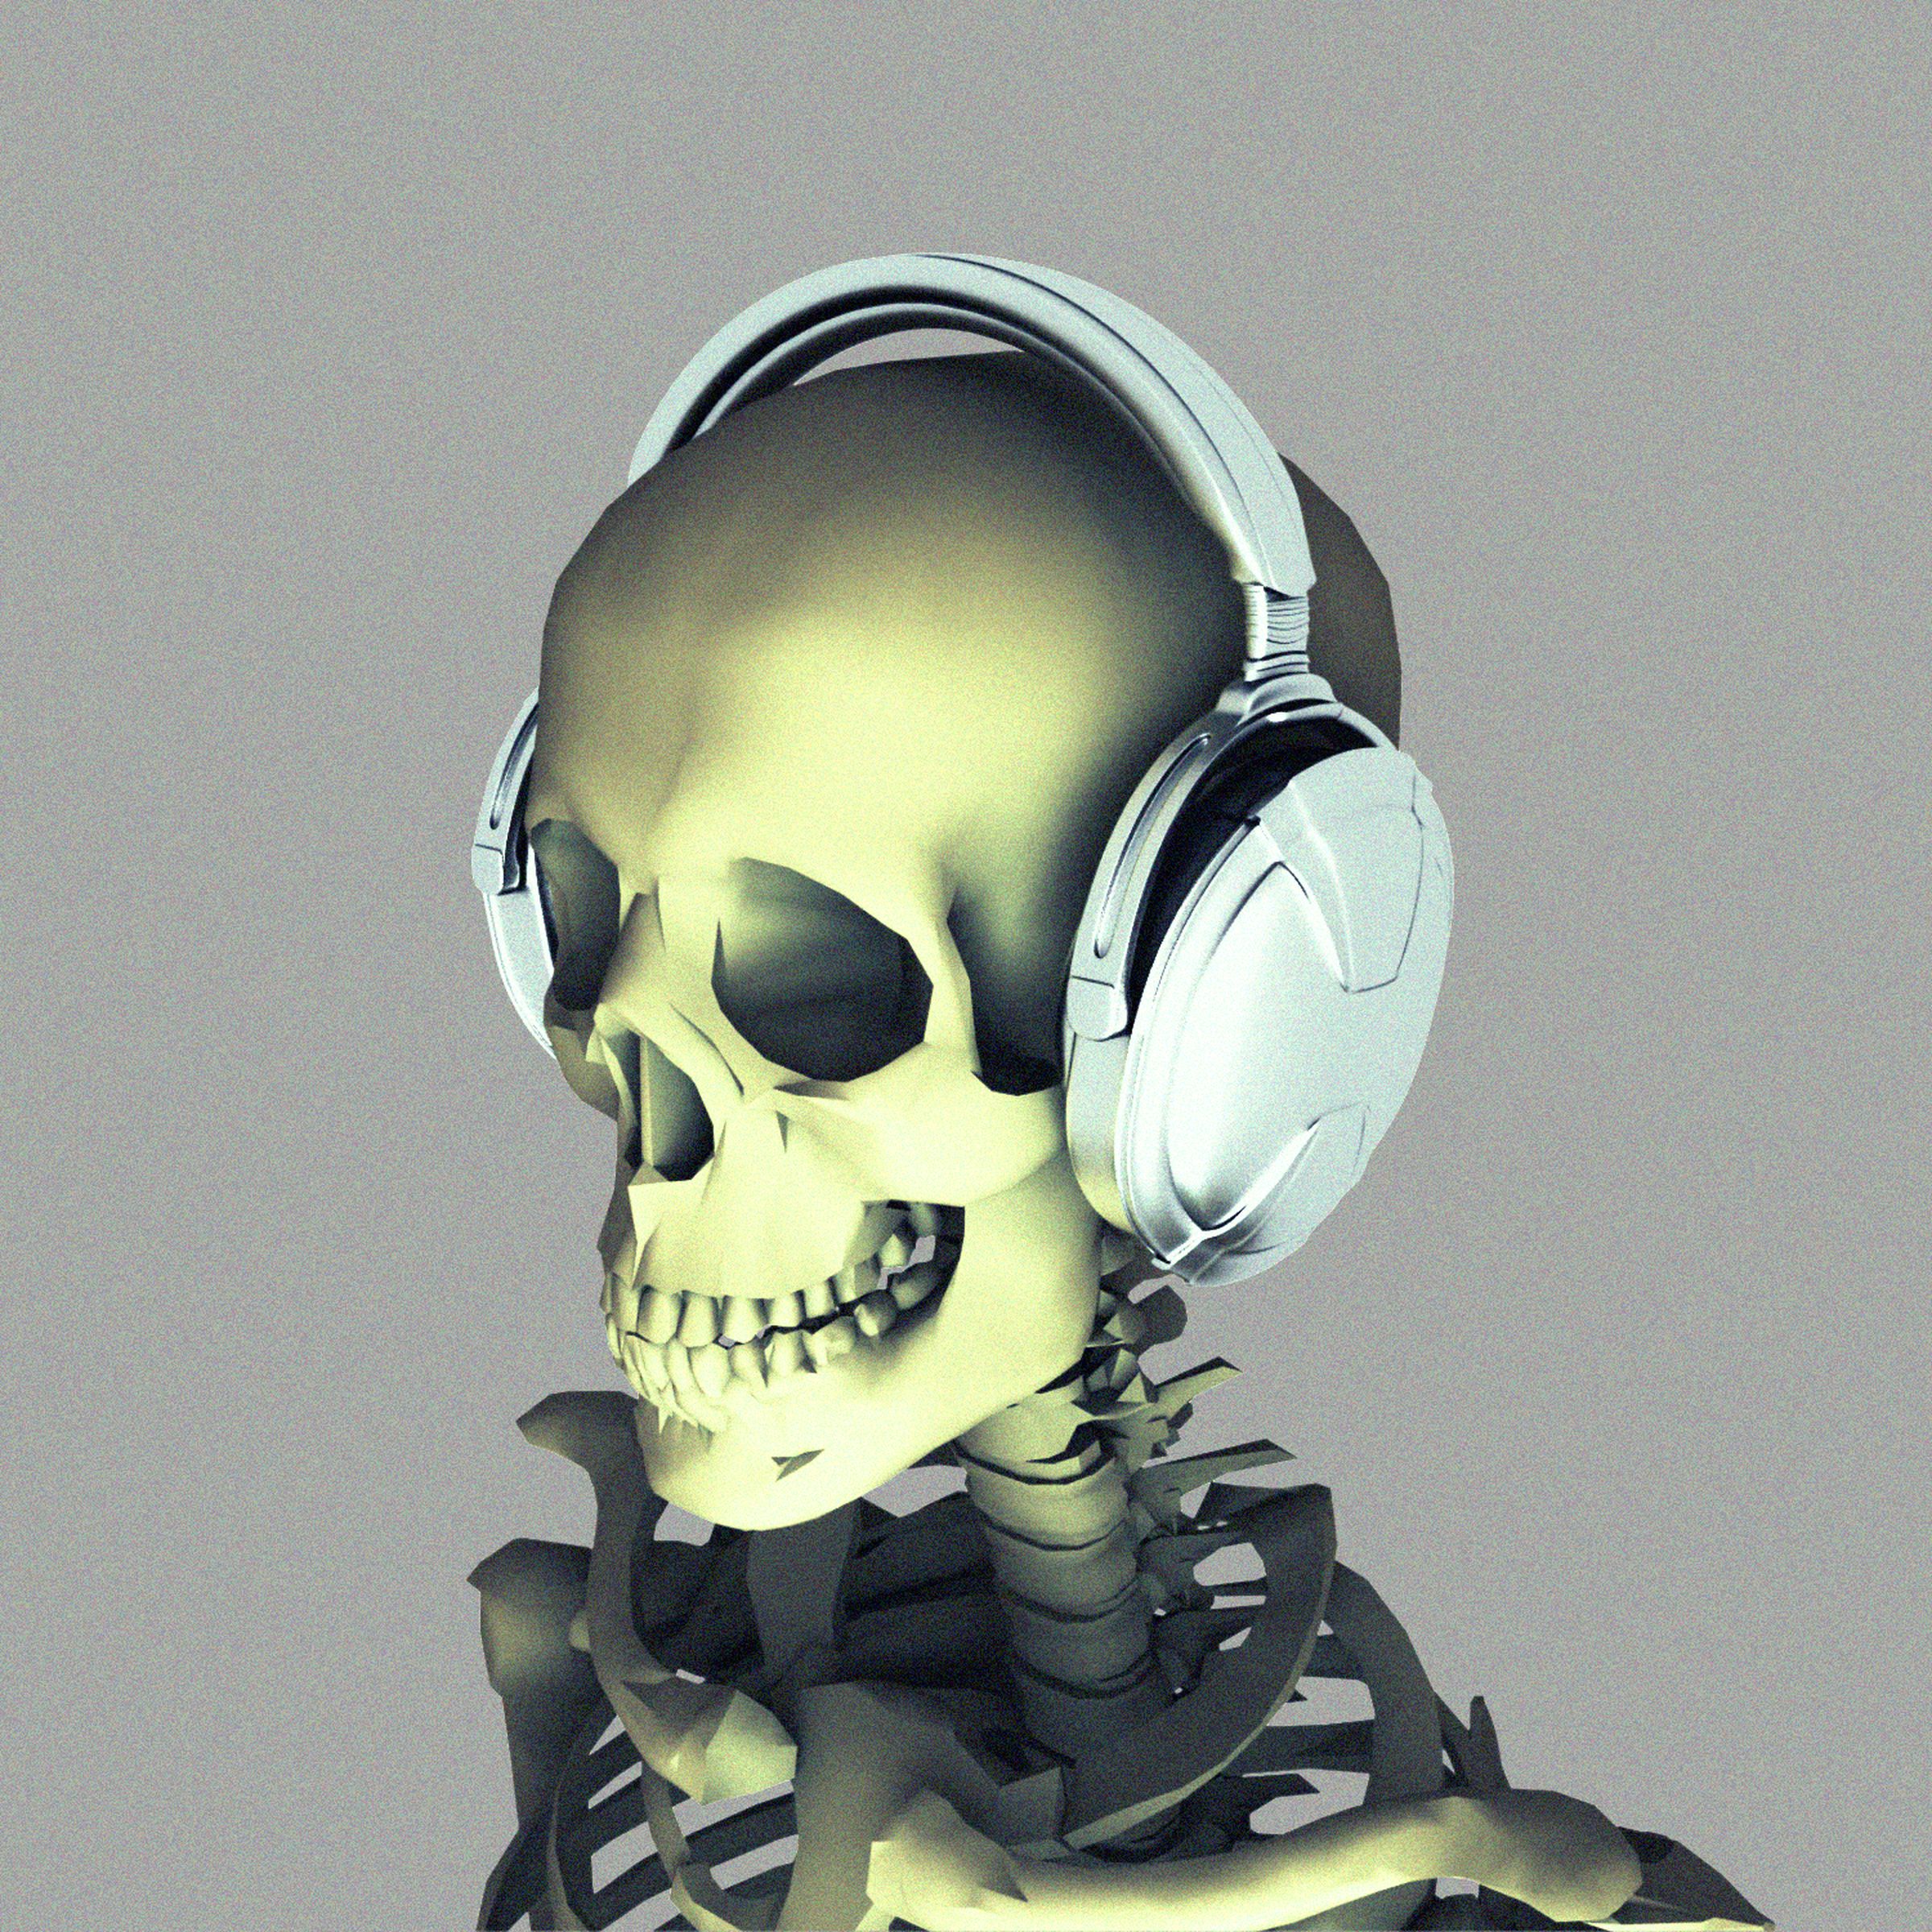 3D illustration of a skeleton with headphones on.